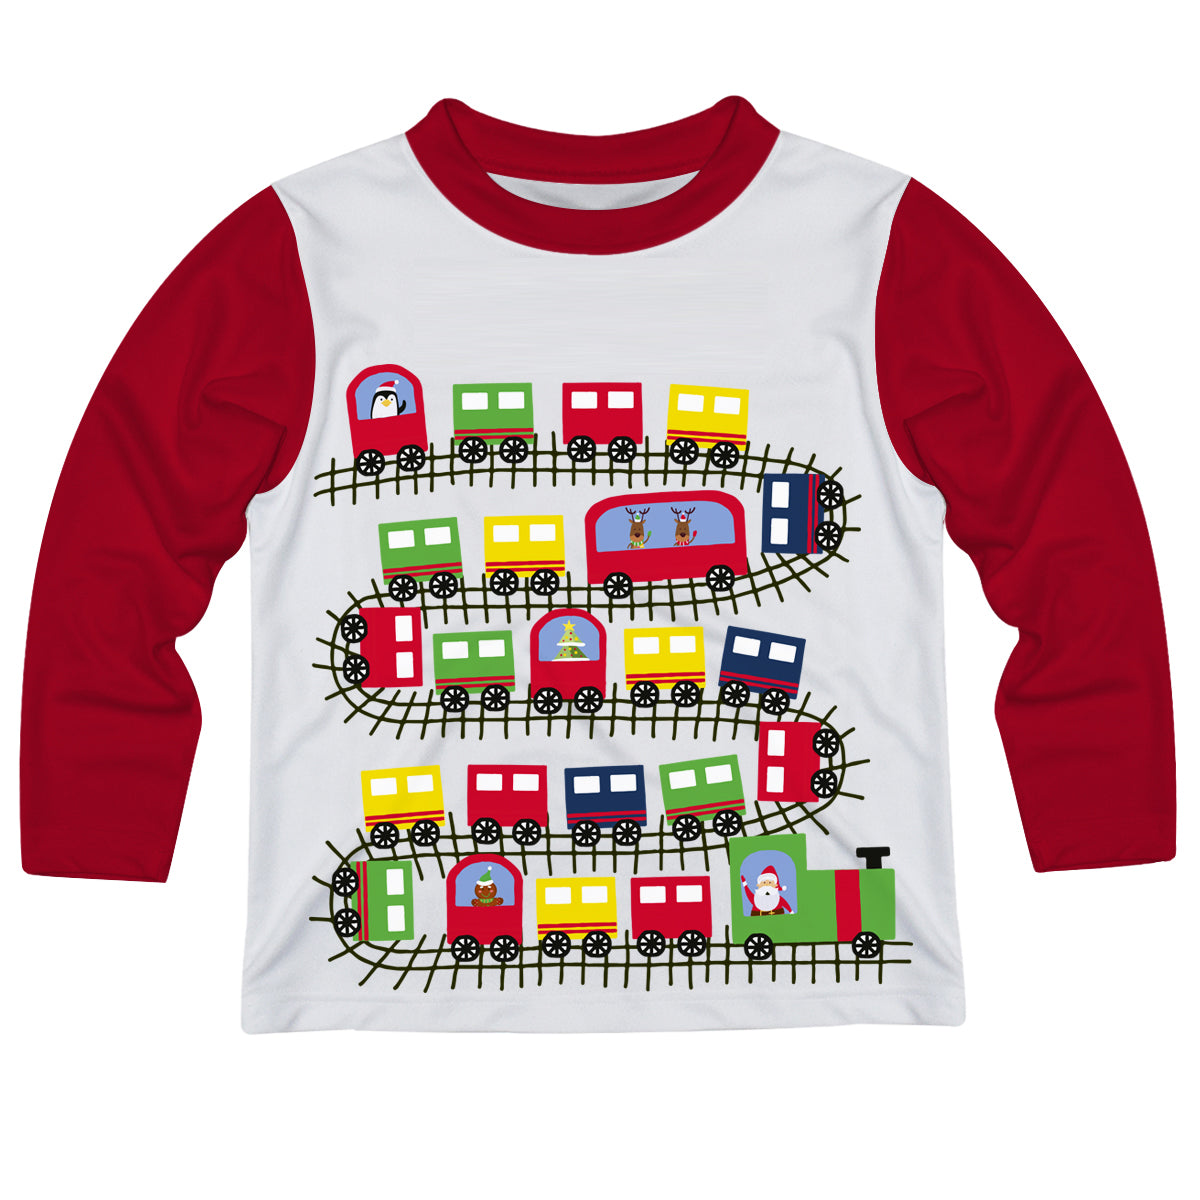 Boys white and red Santa tee shirt with name - Wimziy&Co.